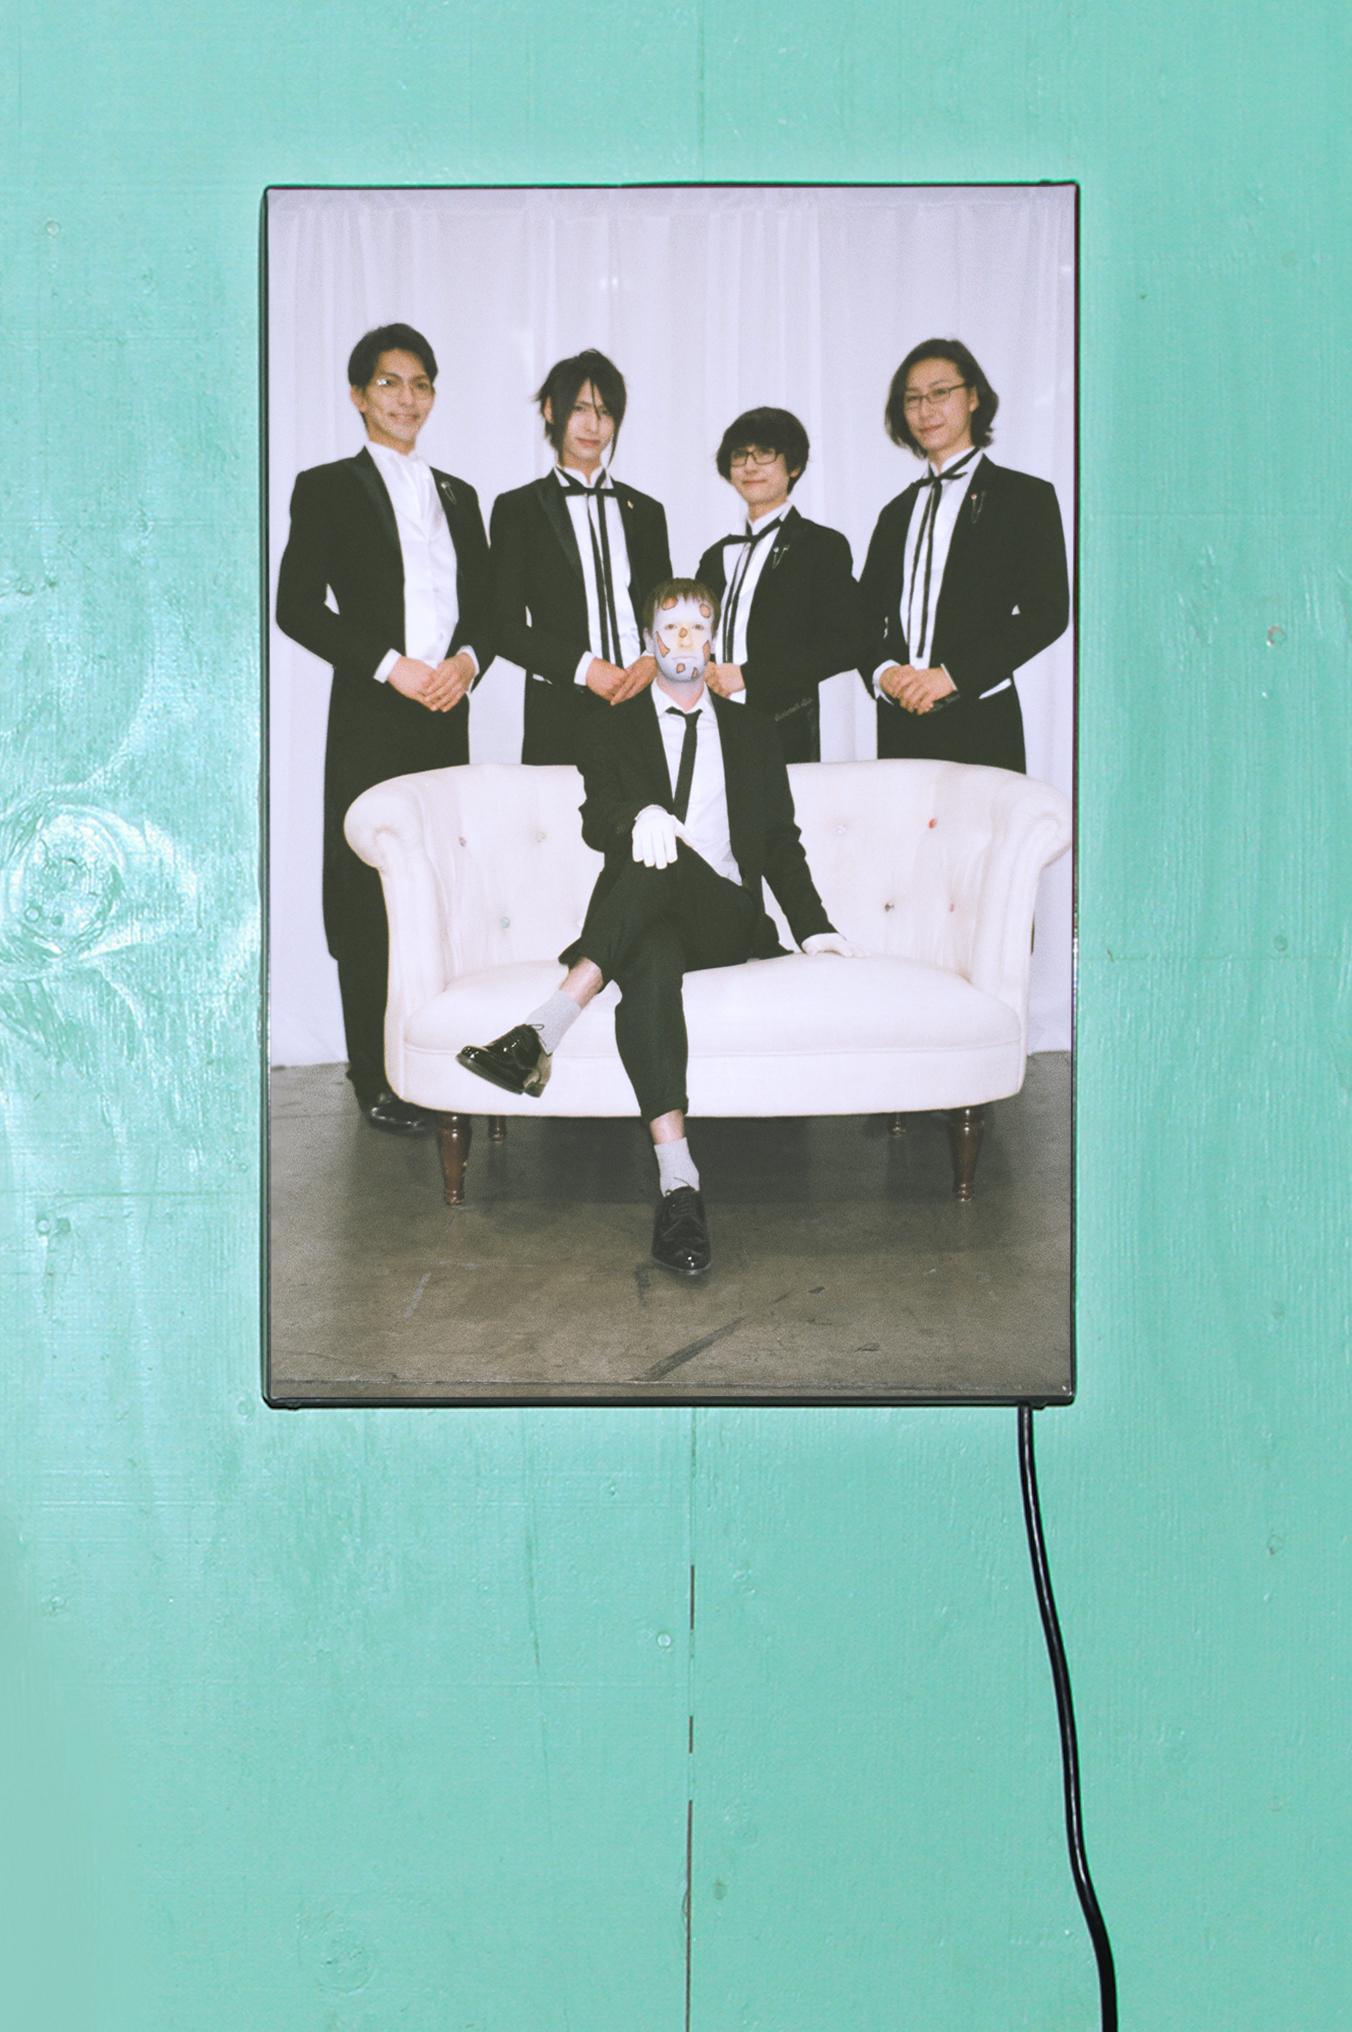 Photohrpahic lightbox print of Jesse surrounded by butlers hung on a teal wooden background 